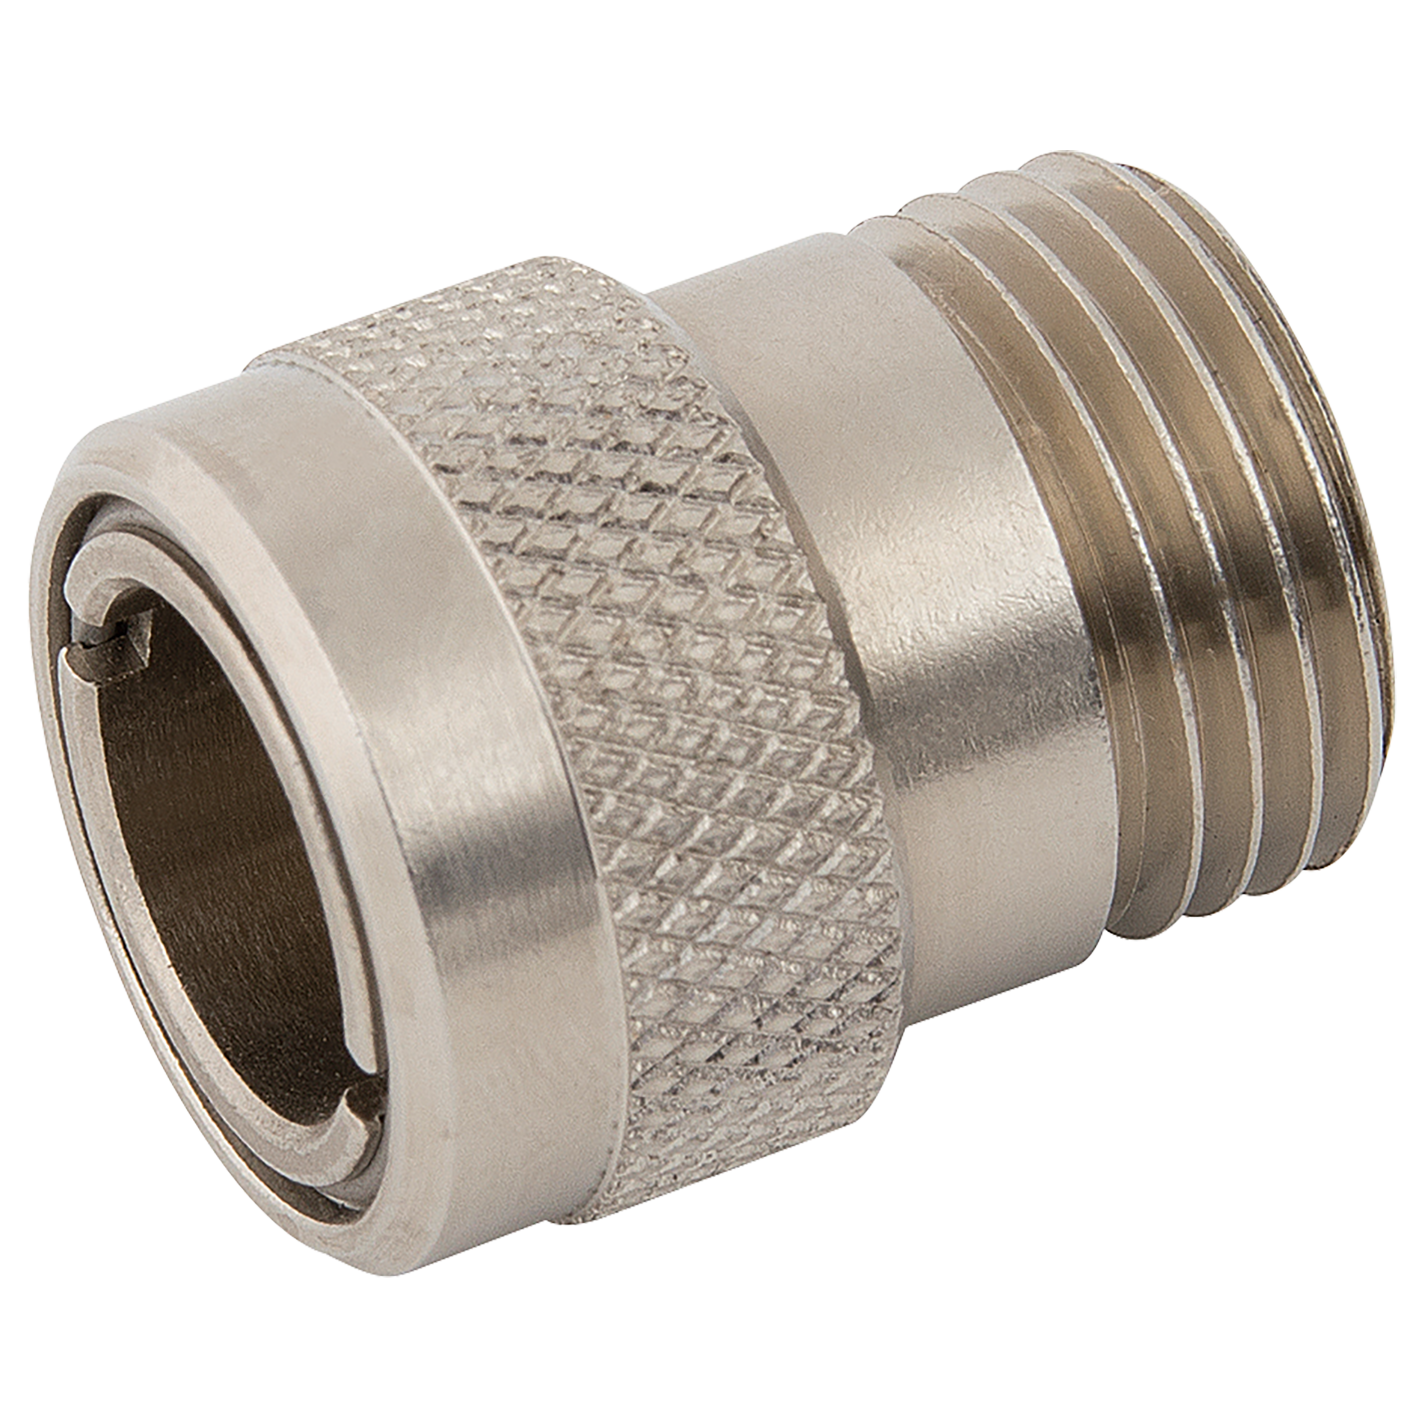 1/2" BSPP Male Coupling